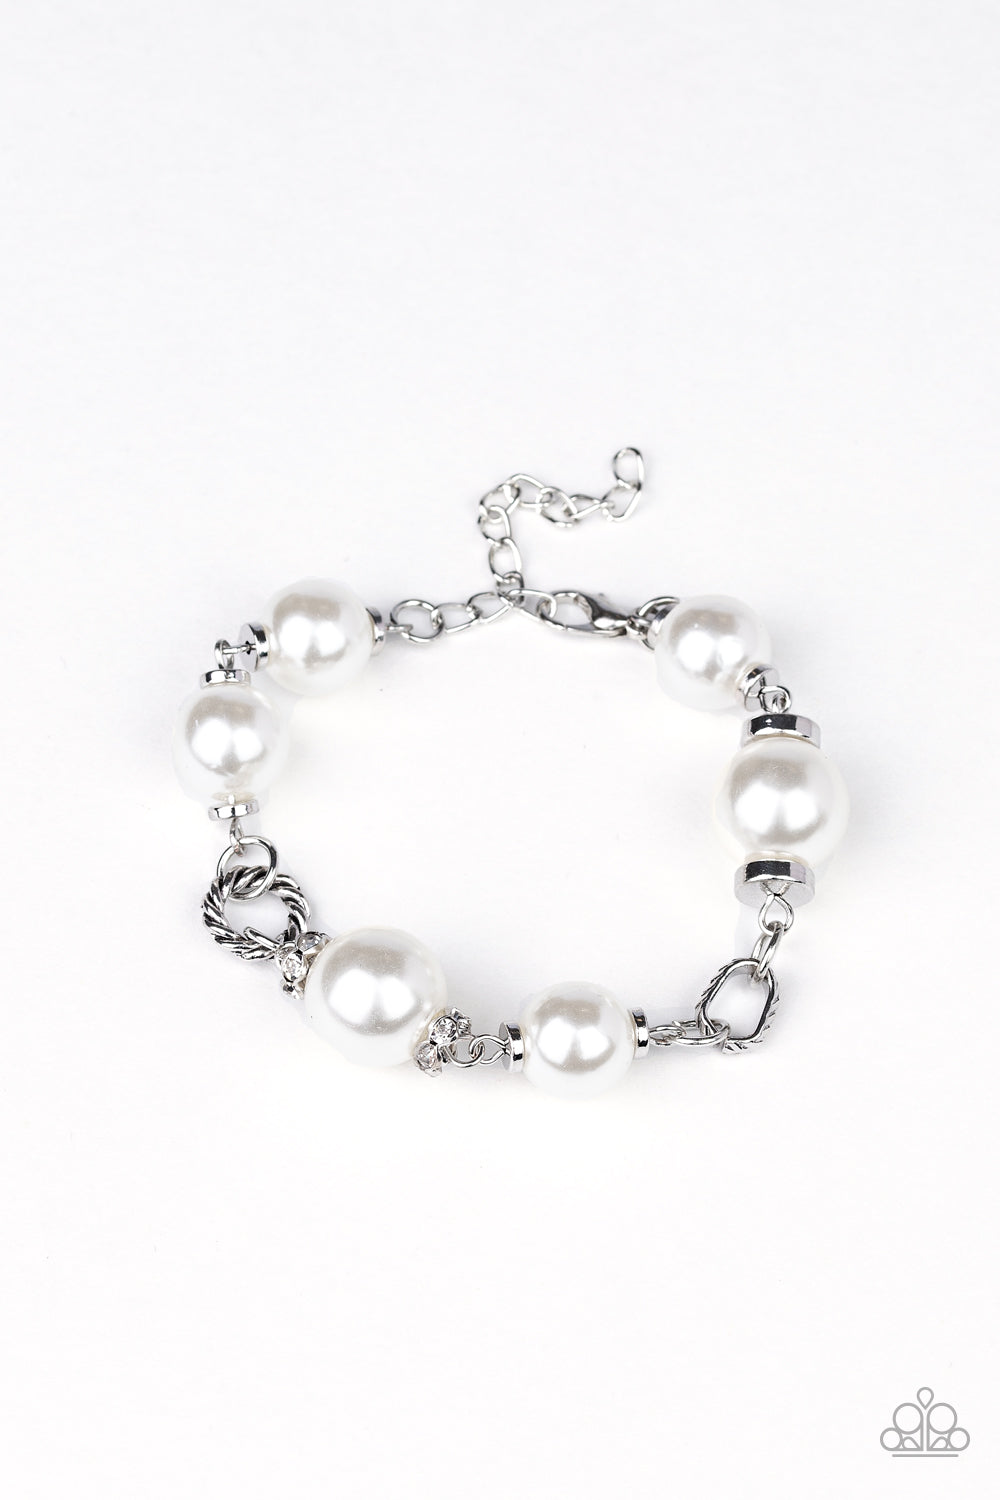 Boardroom Baller - White Pearl Bracelet - Paparazzi Accessories - A classic collection of white pearls, white rhinestone encrusted rings, and ornate silver accents link across the wrist for a timeless look. Features an adjustable clasp closure. Sold as one individual bracelet.